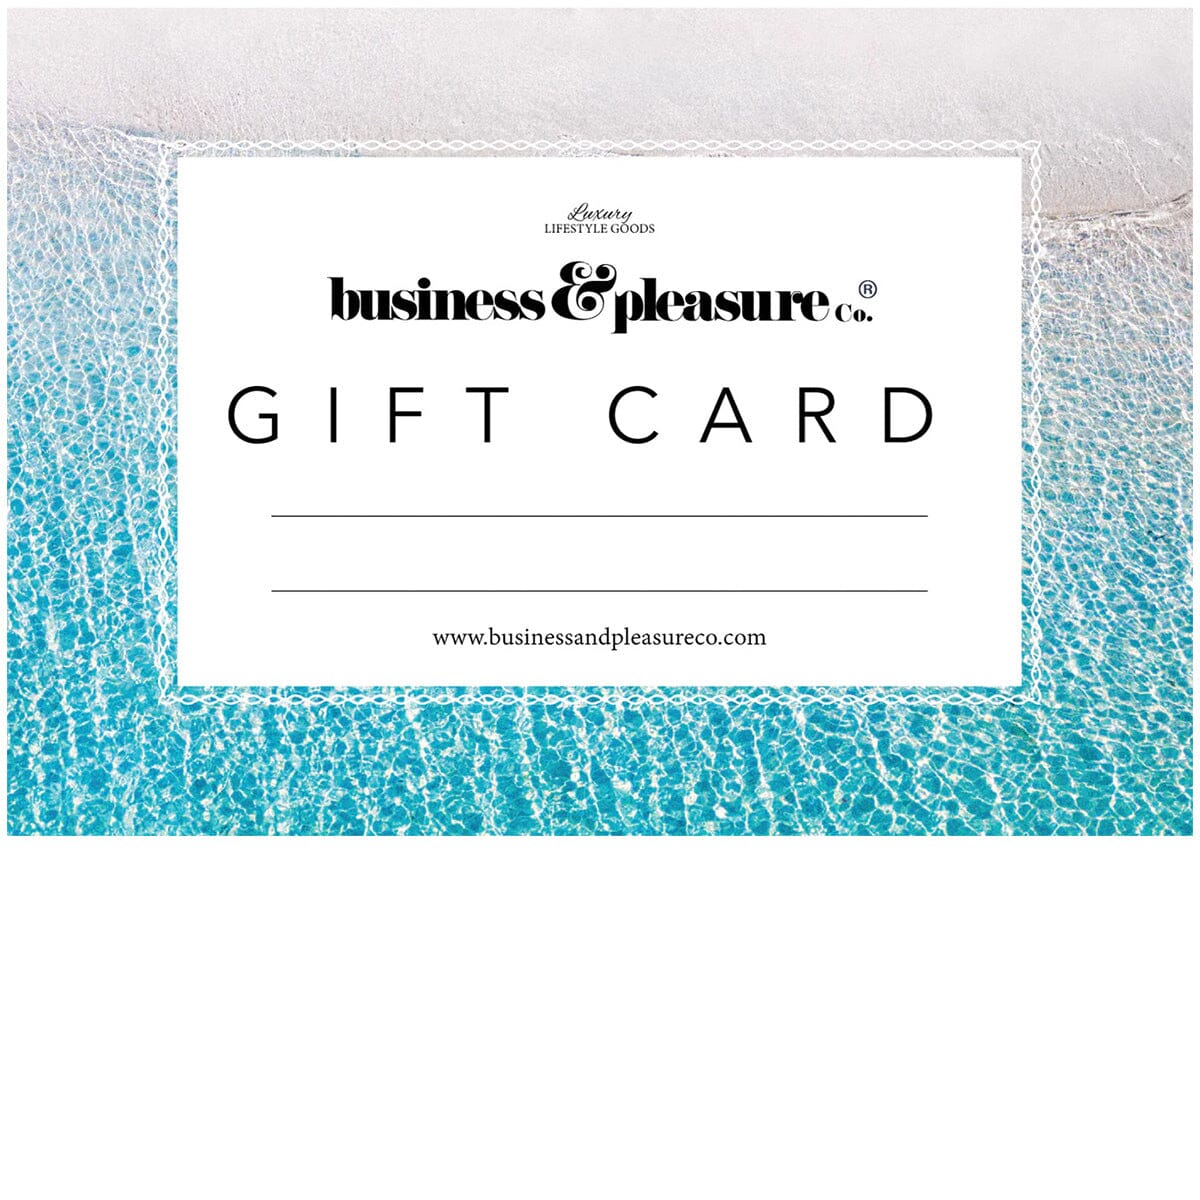 Gift Card Gift Cards Business & Pleasure Co 